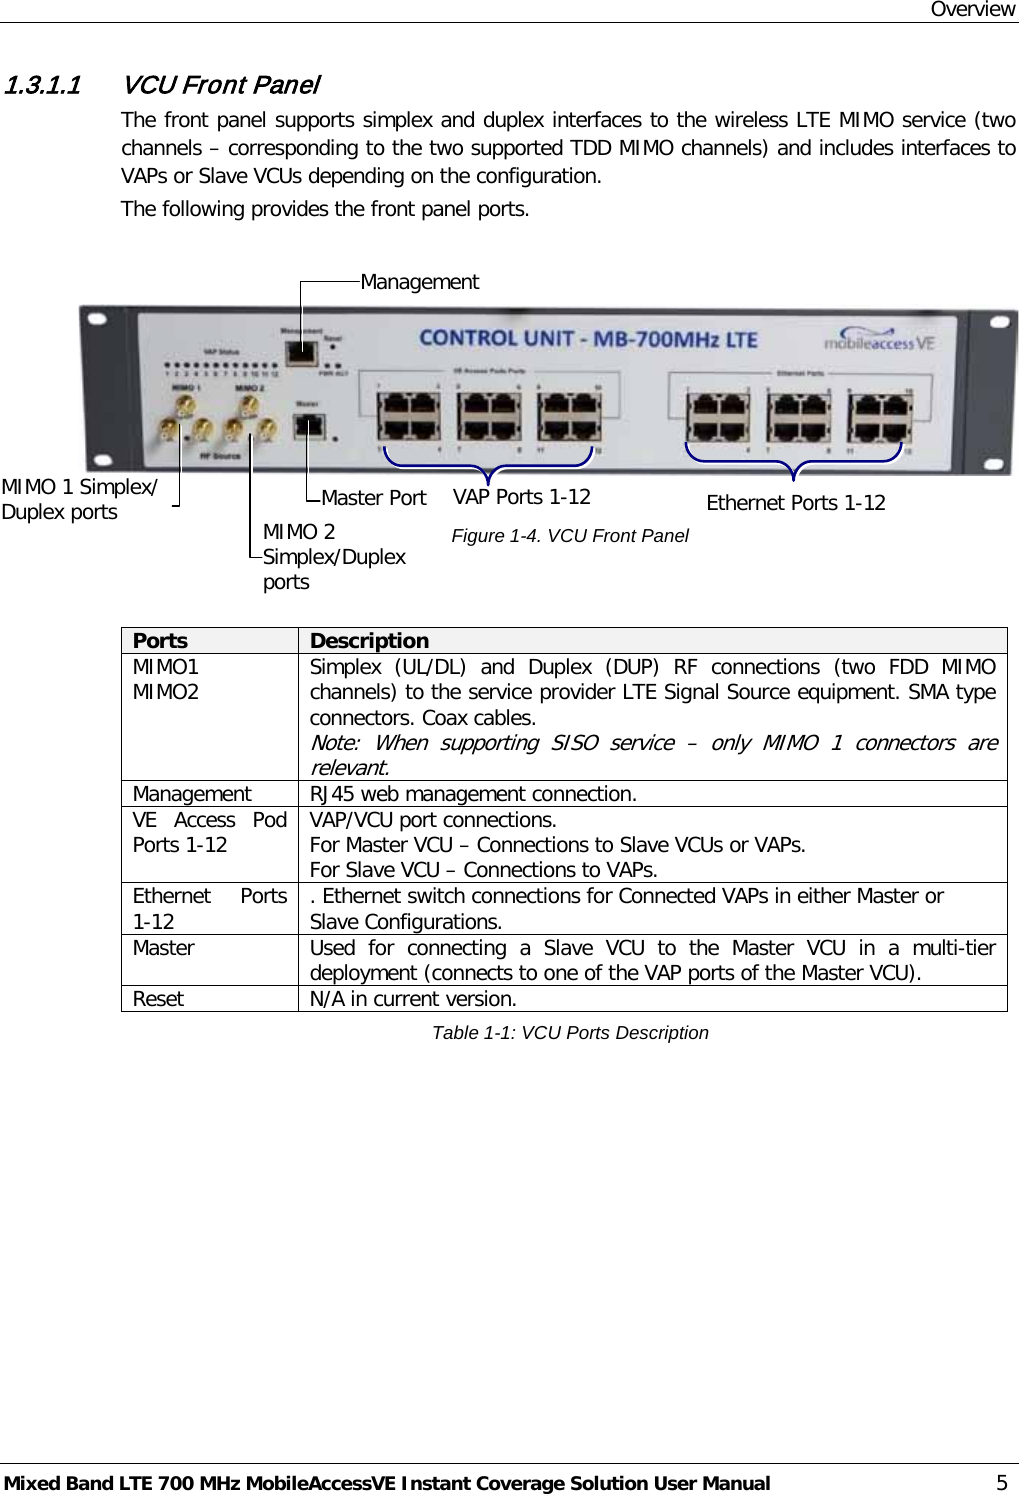 Overview Mixed Band LTE 700 MHz MobileAccessVE Instant Coverage Solution User Manual  5 1.3.1.1 VCU Front Panel The front panel supports simplex and duplex interfaces to the wireless LTE MIMO service (two channels – corresponding to the two supported TDD MIMO channels) and includes interfaces to VAPs or Slave VCUs depending on the configuration. The following provides the front panel ports.         Figure  1-4. VCU Front Panel   Ports Description MIMO1 MIMO2 Simplex (UL/DL) and Duplex (DUP) RF connections (two  FDD  MIMO channels) to the service provider LTE Signal Source equipment. SMA type connectors. Coax cables. Note: When supporting SISO service –  only MIMO 1 connectors  are relevant. Management RJ45 web management connection. VE Access Pod Ports 1-12   VAP/VCU port connections.  For Master VCU – Connections to Slave VCUs or VAPs. For Slave VCU – Connections to VAPs. Ethernet Ports 1-12  . Ethernet switch connections for Connected VAPs in either Master or Slave Configurations.  Master Used for connecting a Slave VCU to the Master VCU in a multi-tier deployment (connects to one of the VAP ports of the Master VCU). Reset  N/A in current version. Table  1-1: VCU Ports Description    Device  Set the VAP  Ethernet Ports 1-12 VAP Ports 1-12 Management  MIMO 2 Simplex/Duplex ports   MIMO 1 Simplex/ Duplex ports    Master Port   